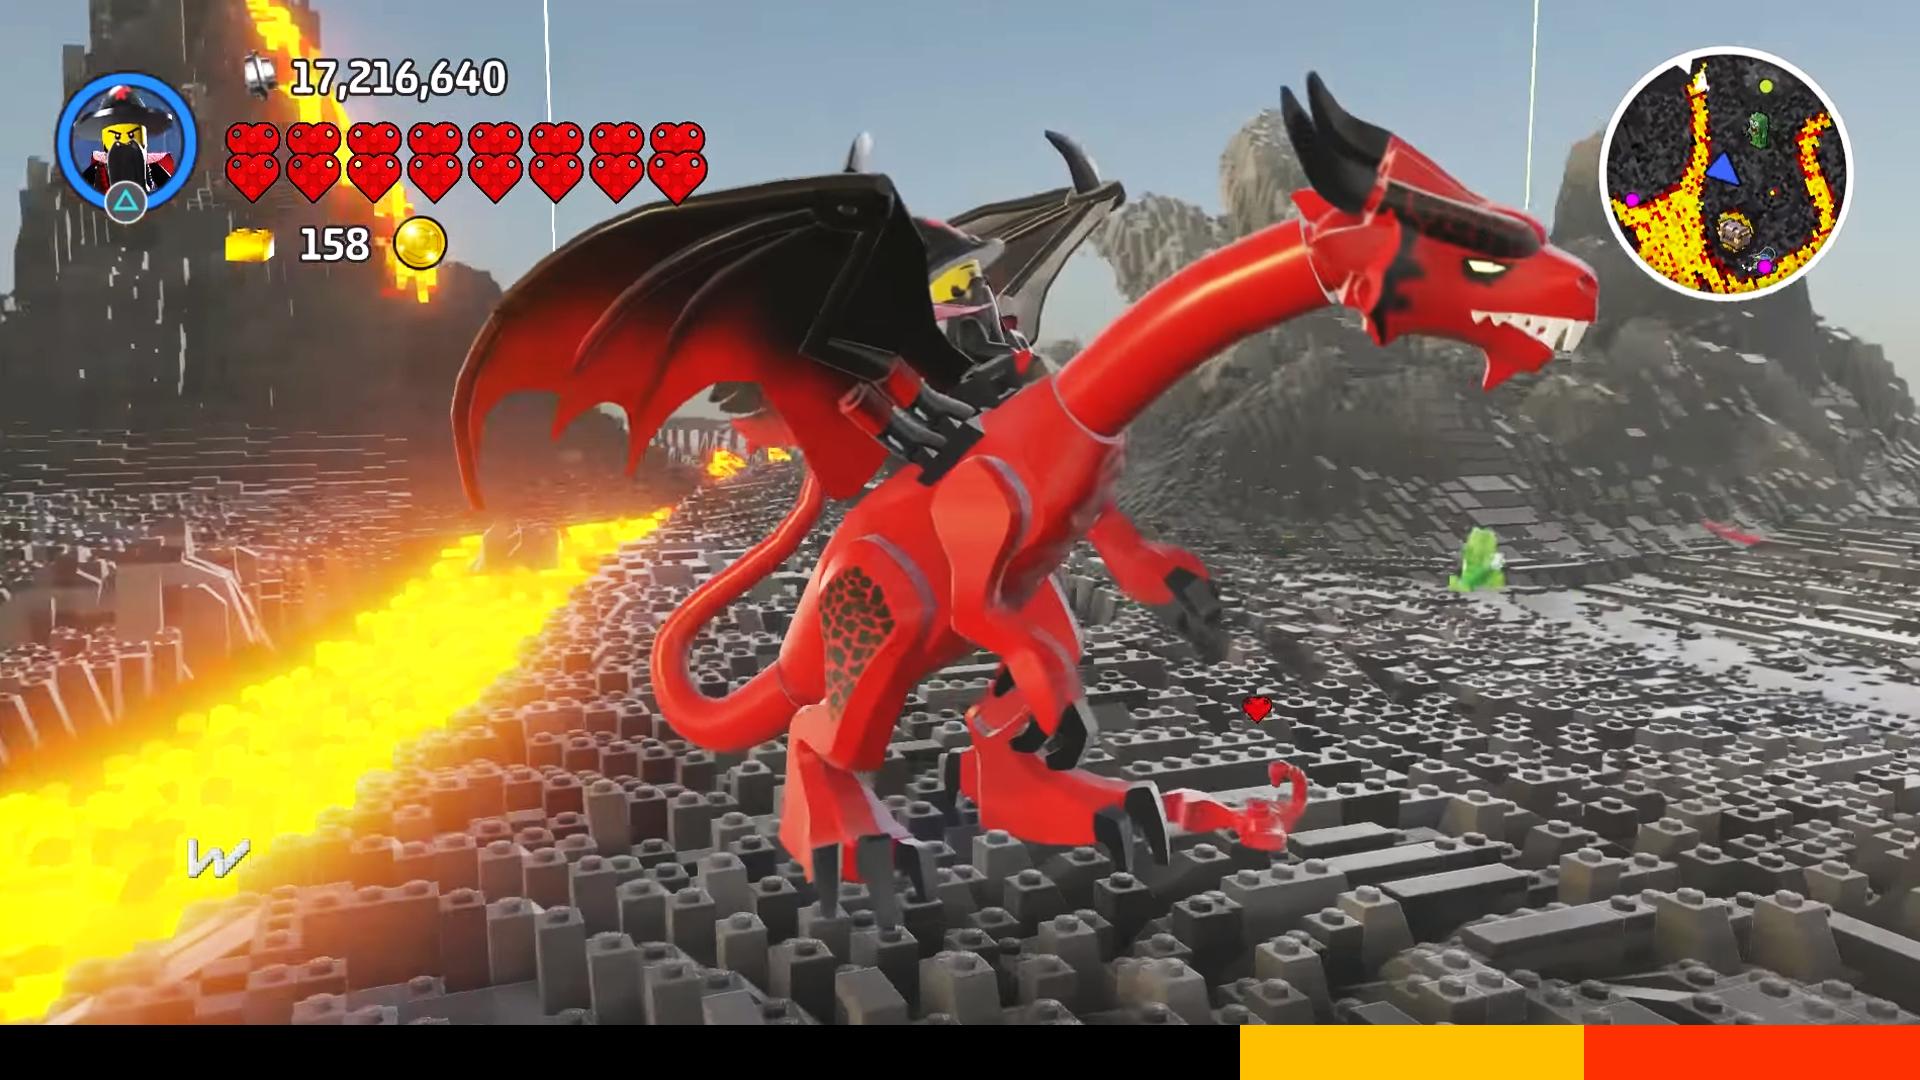 Top Lego Worlds For Guide for Android - APK Download